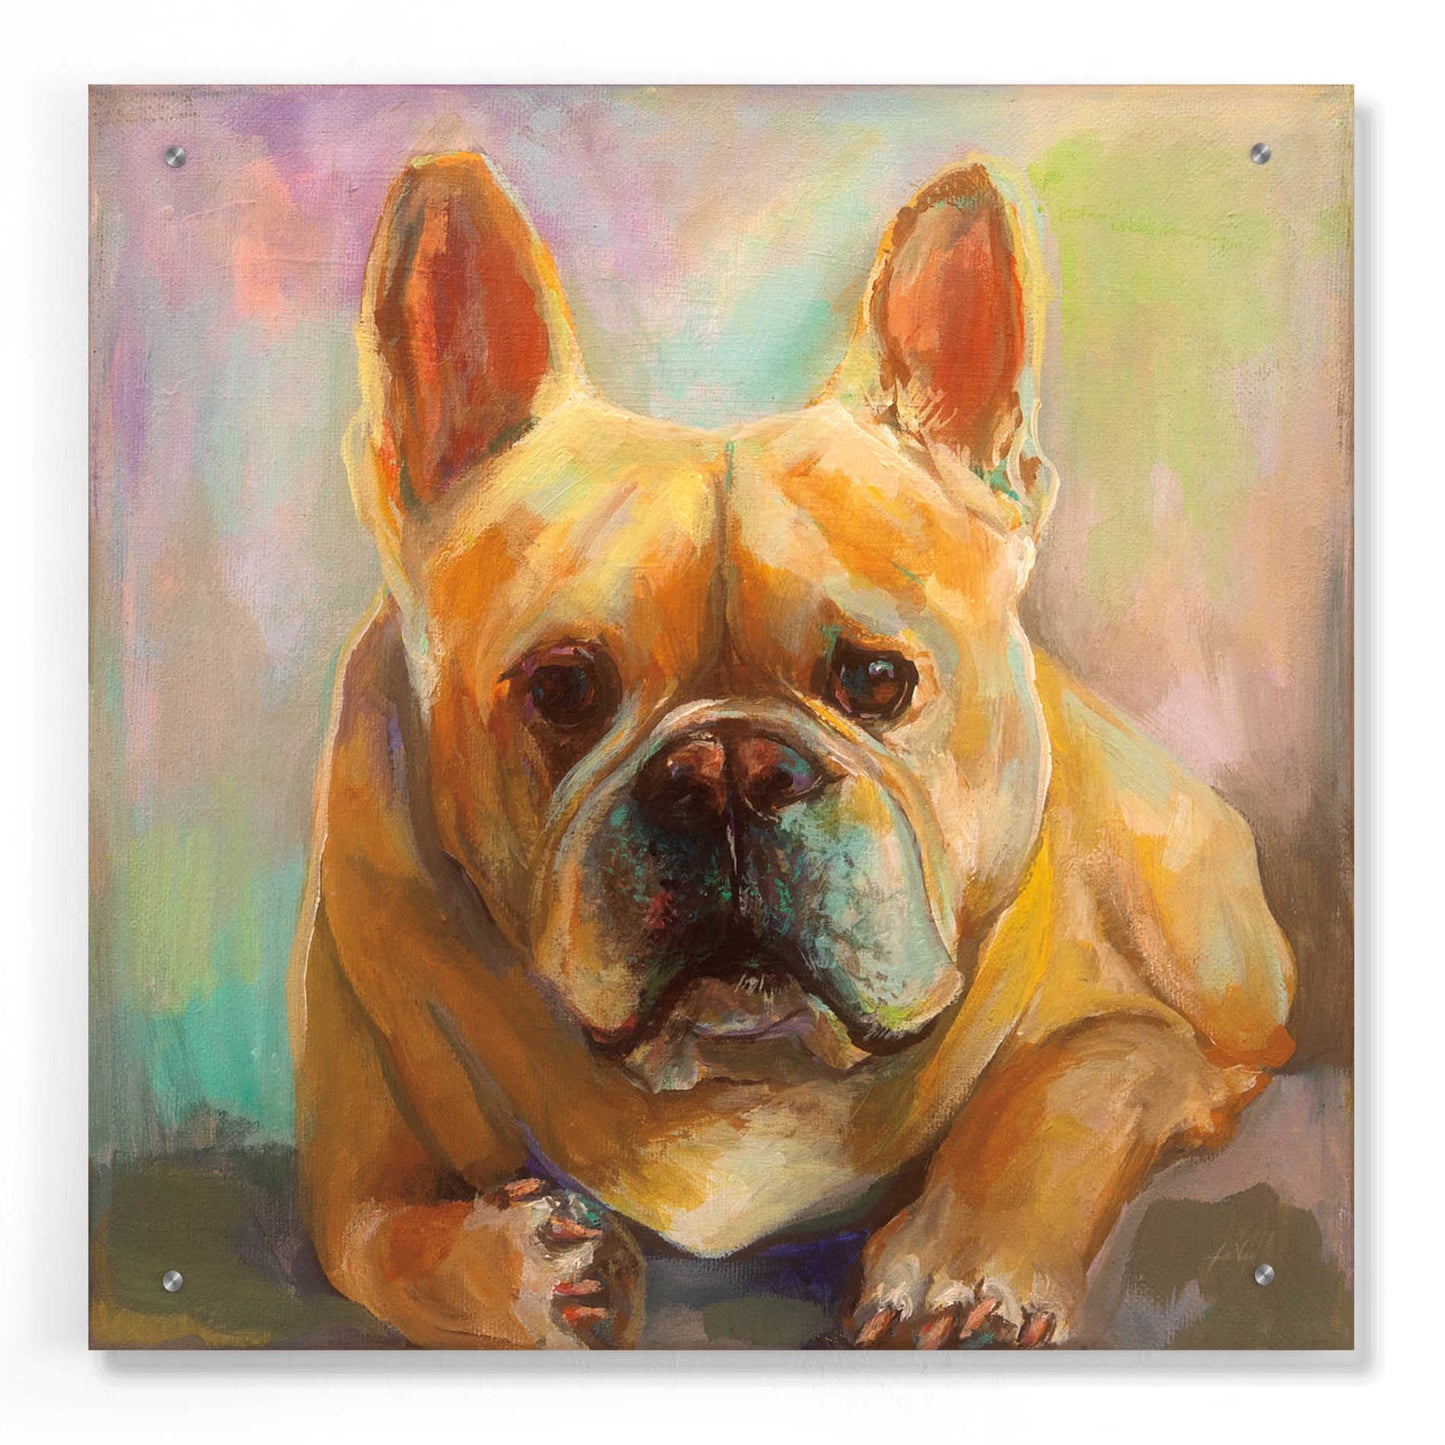 Epic Art 'Frenchie' by Jeanette Vertentes, Acrylic Glass Wall Art,24x24